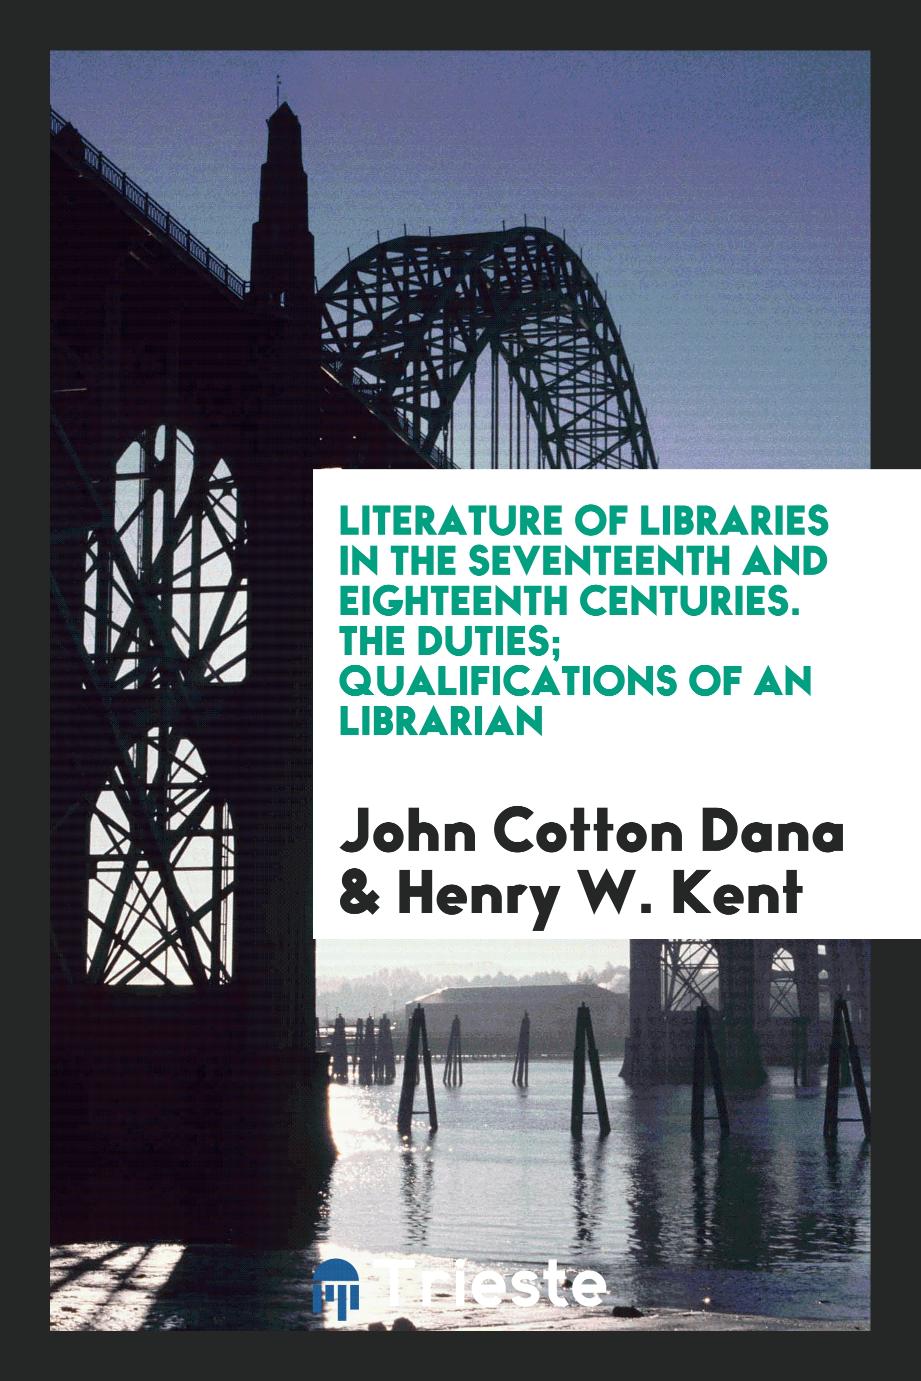 Literature of libraries in the seventeenth and eighteenth centuries. The duties; Qualifications of an librarian